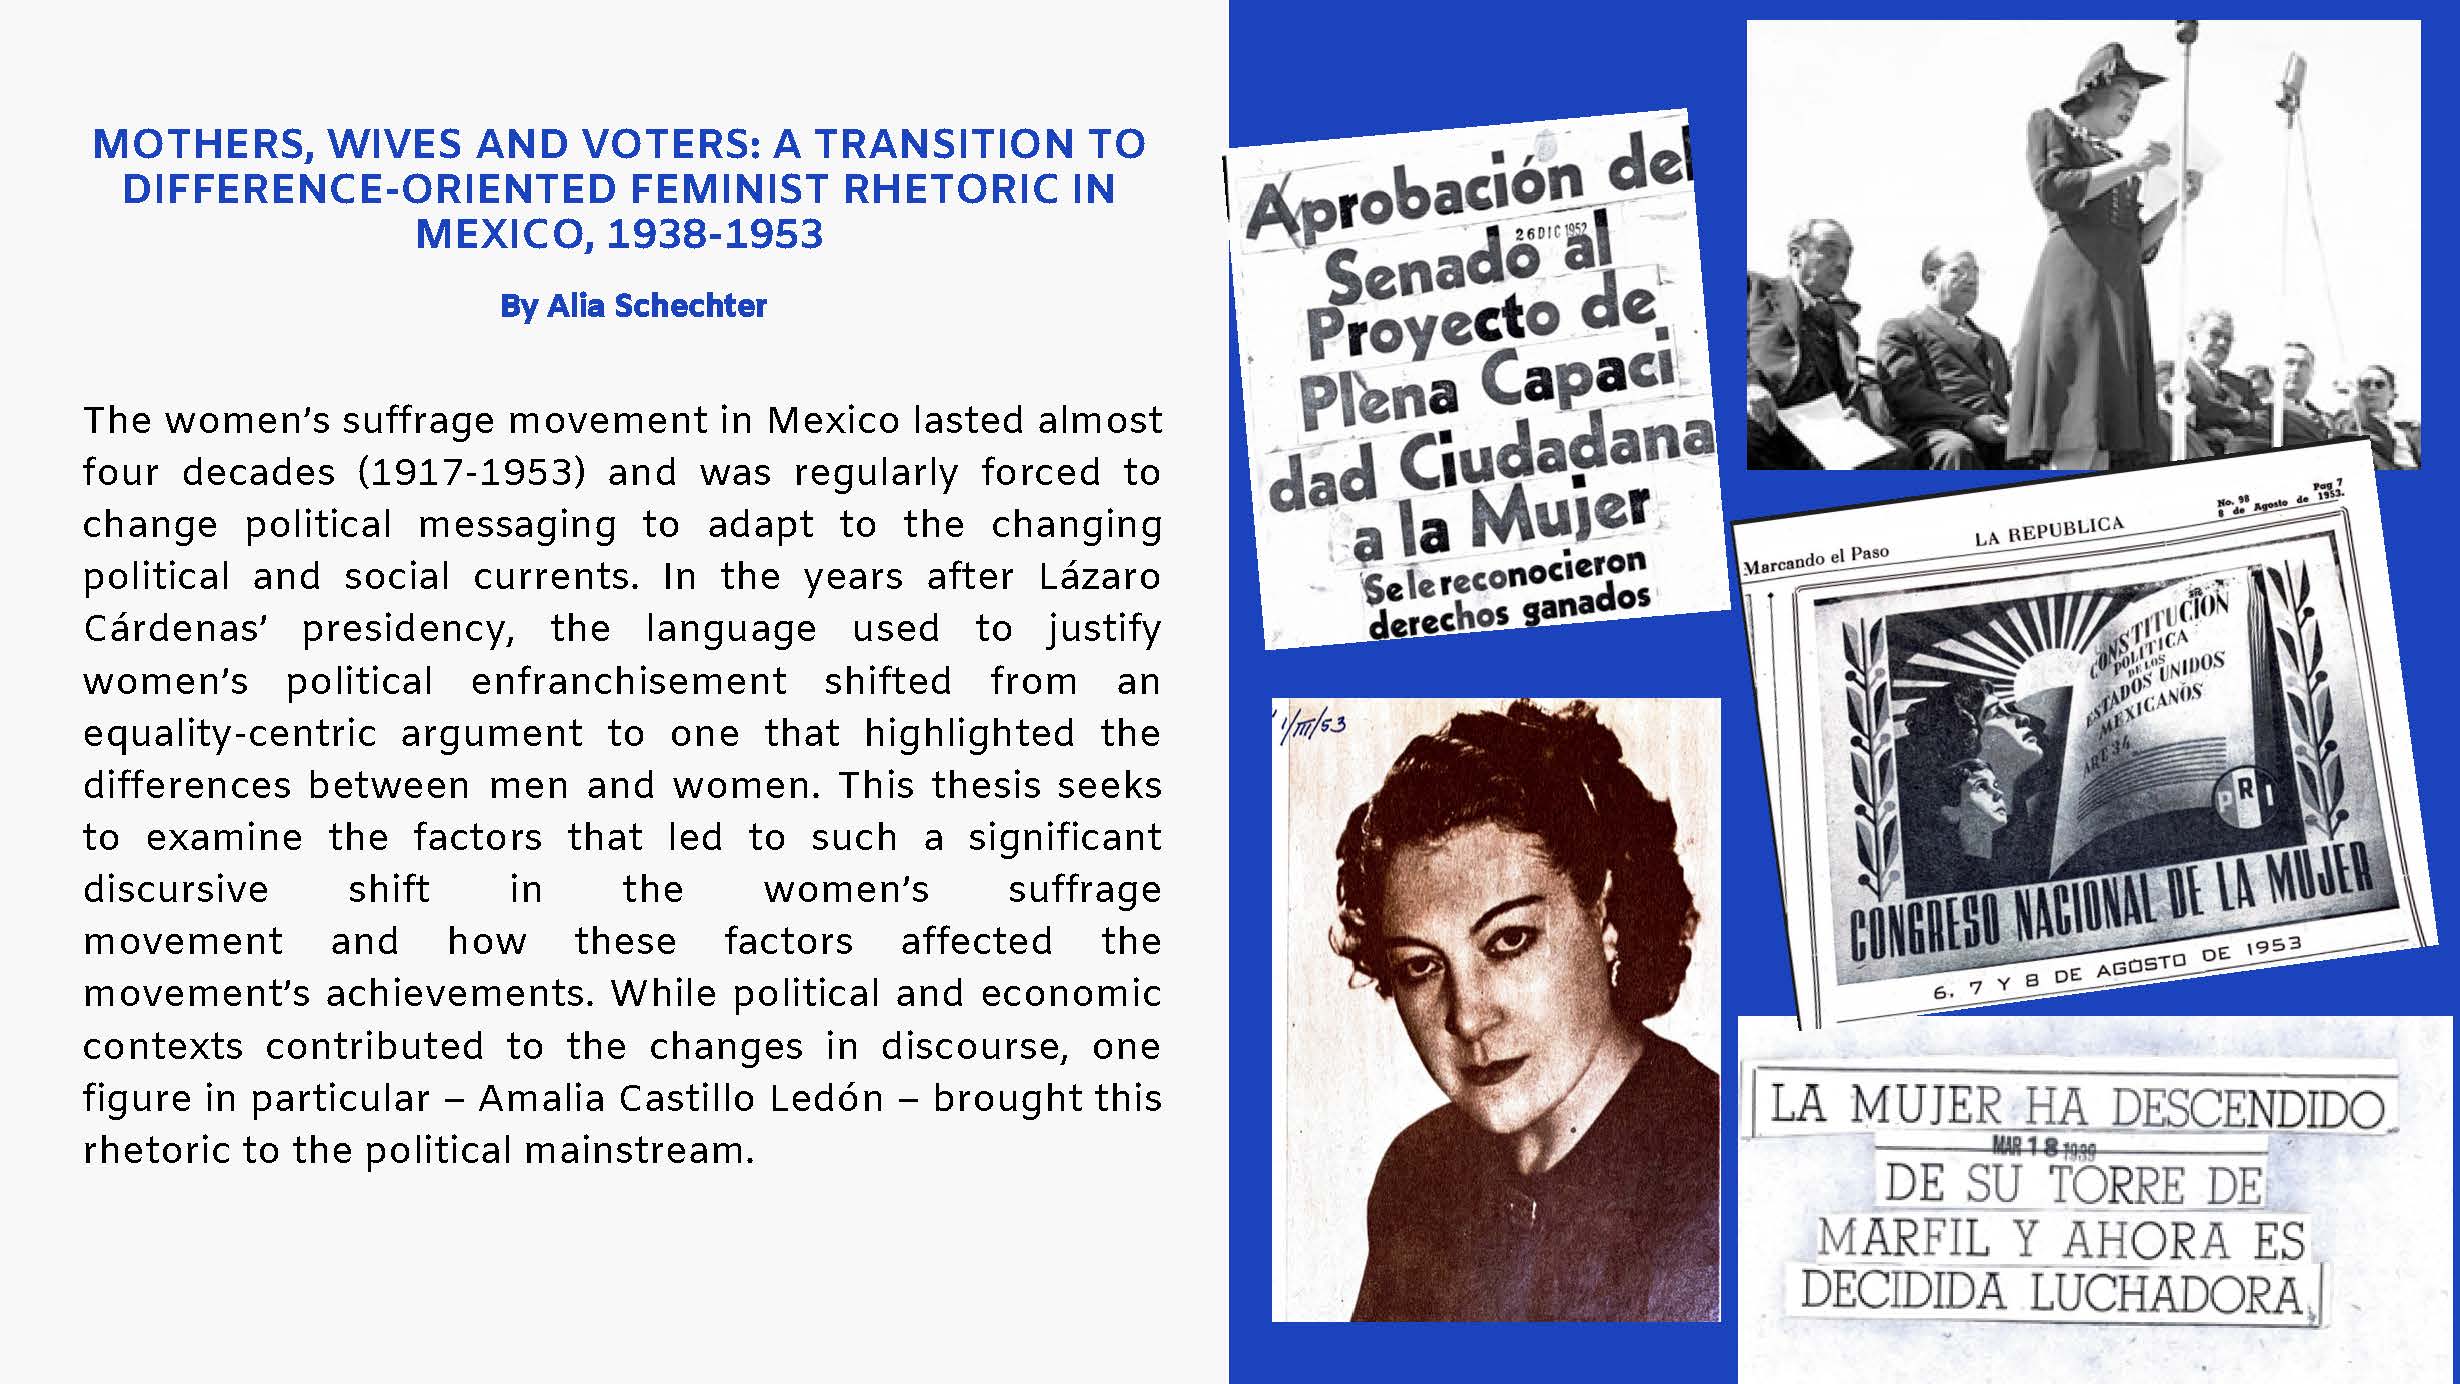 Mothers, Wives and Voters: A Transition to Difference-Oriented Feminist Rhetoric in Mexico, 1938-1953